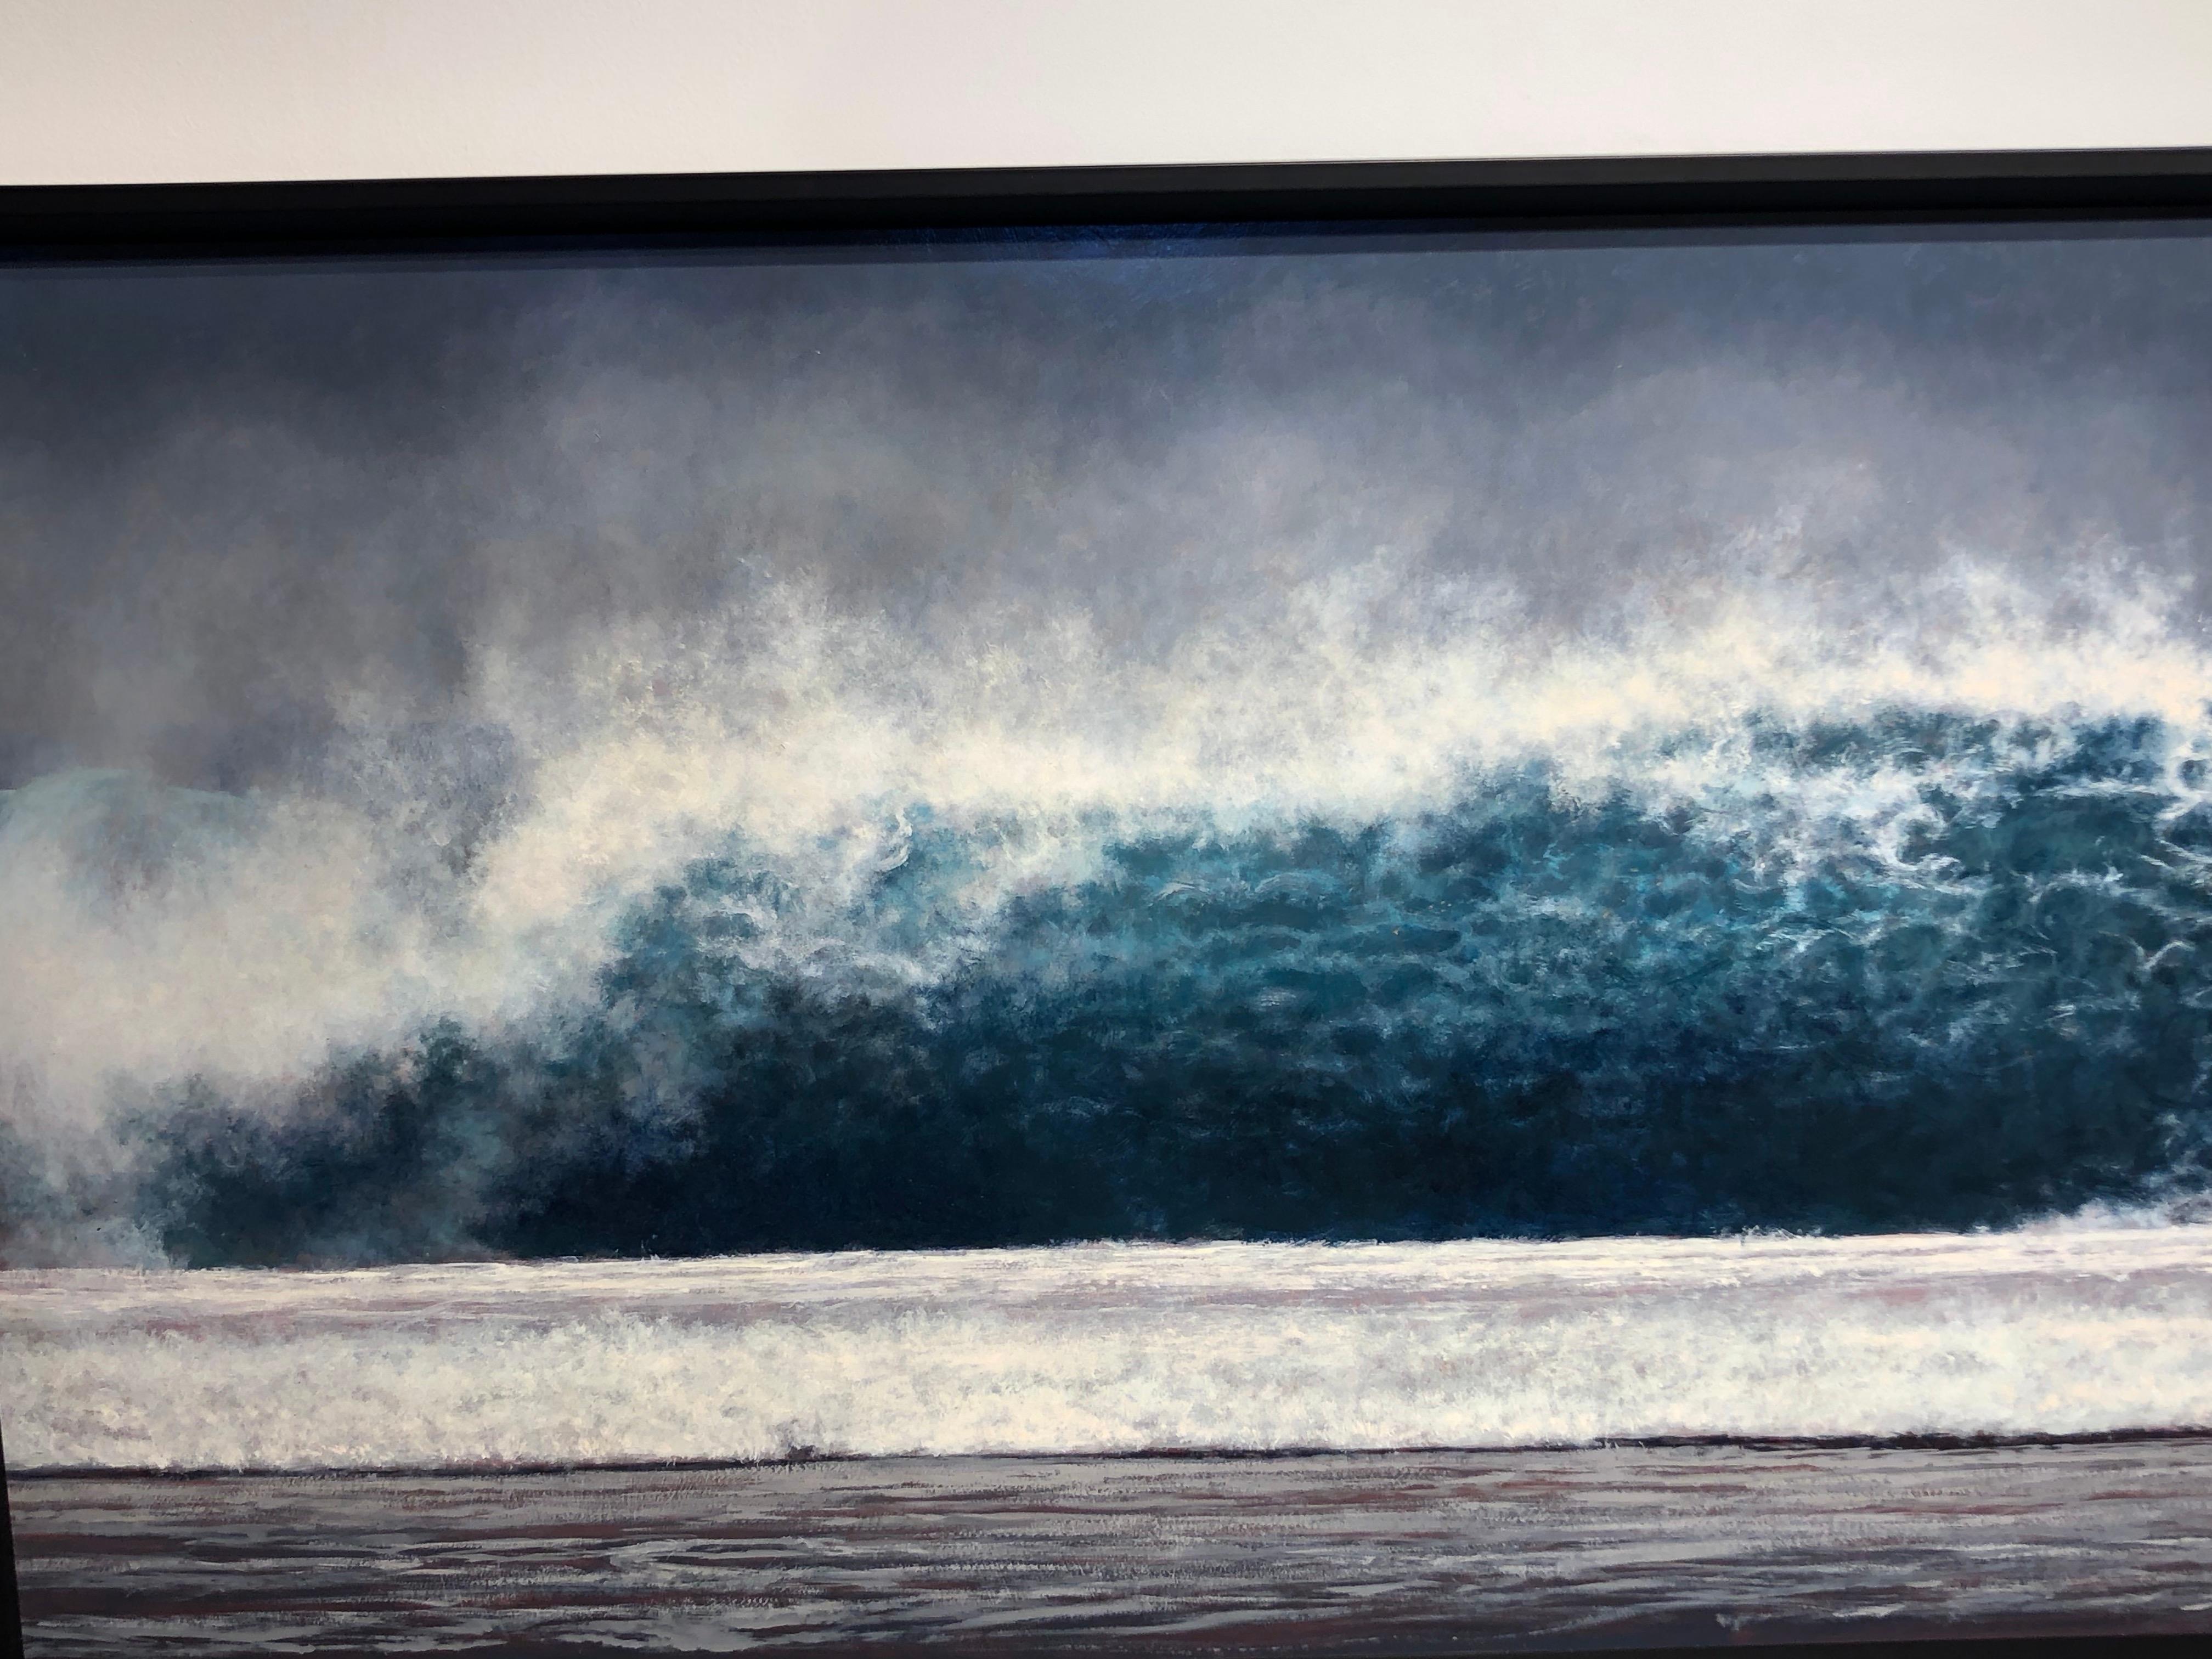 Wave, Kauai - Oil on Panel Painting in Blue Turquoise, White Sea Foam and Gray For Sale 4